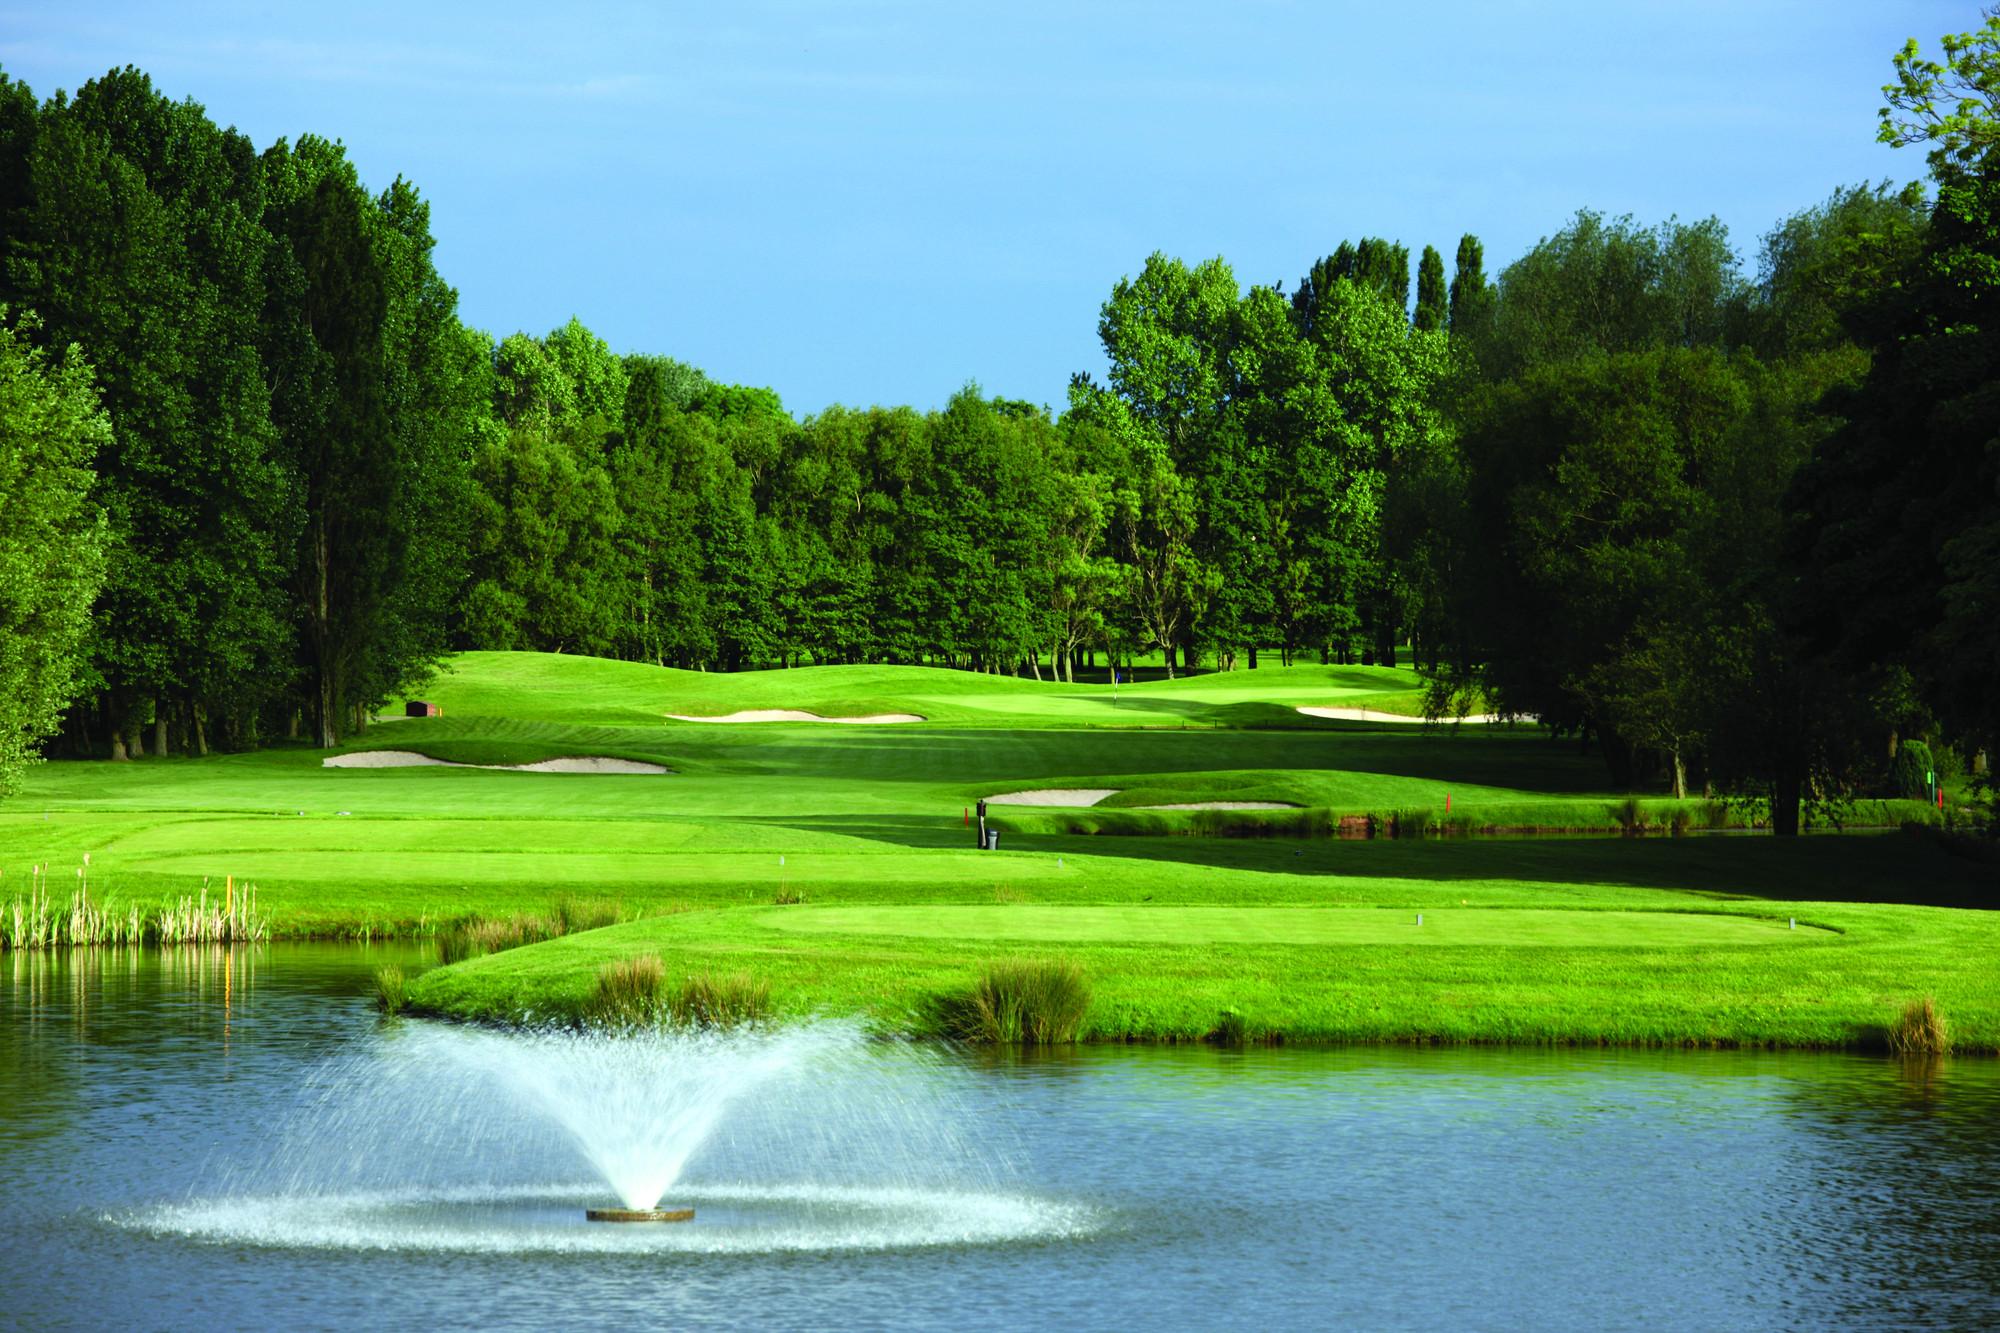 The Belfry Golf boasts some of the most popular golf course within West Midlands